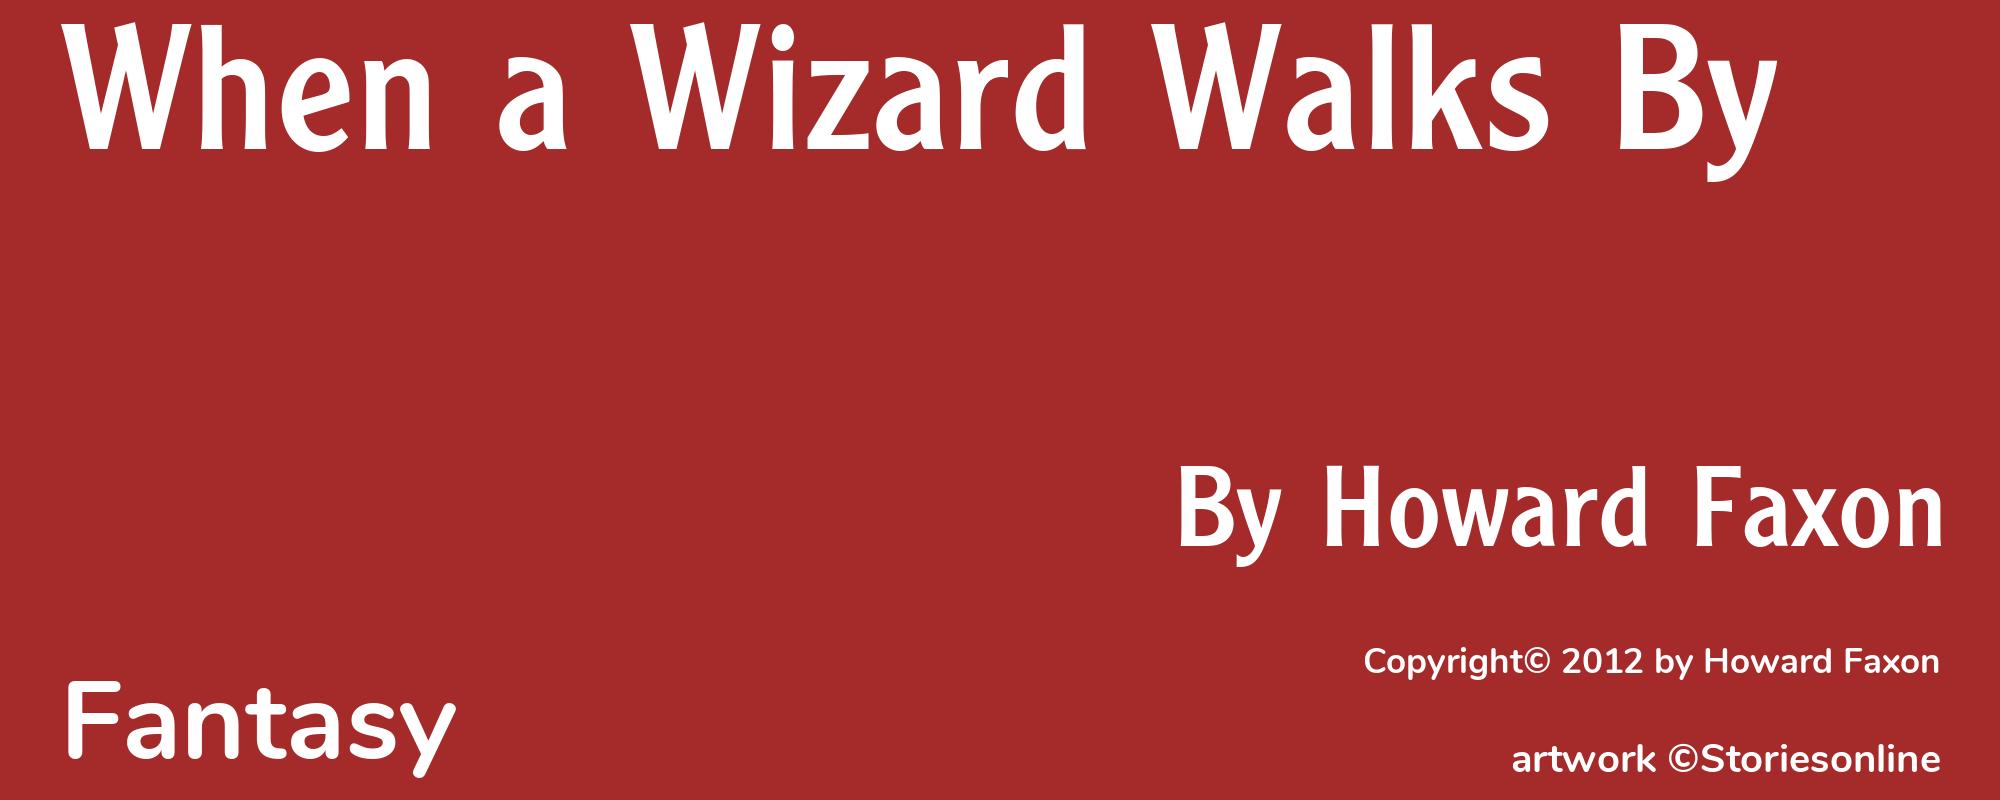 When a Wizard Walks By - Cover